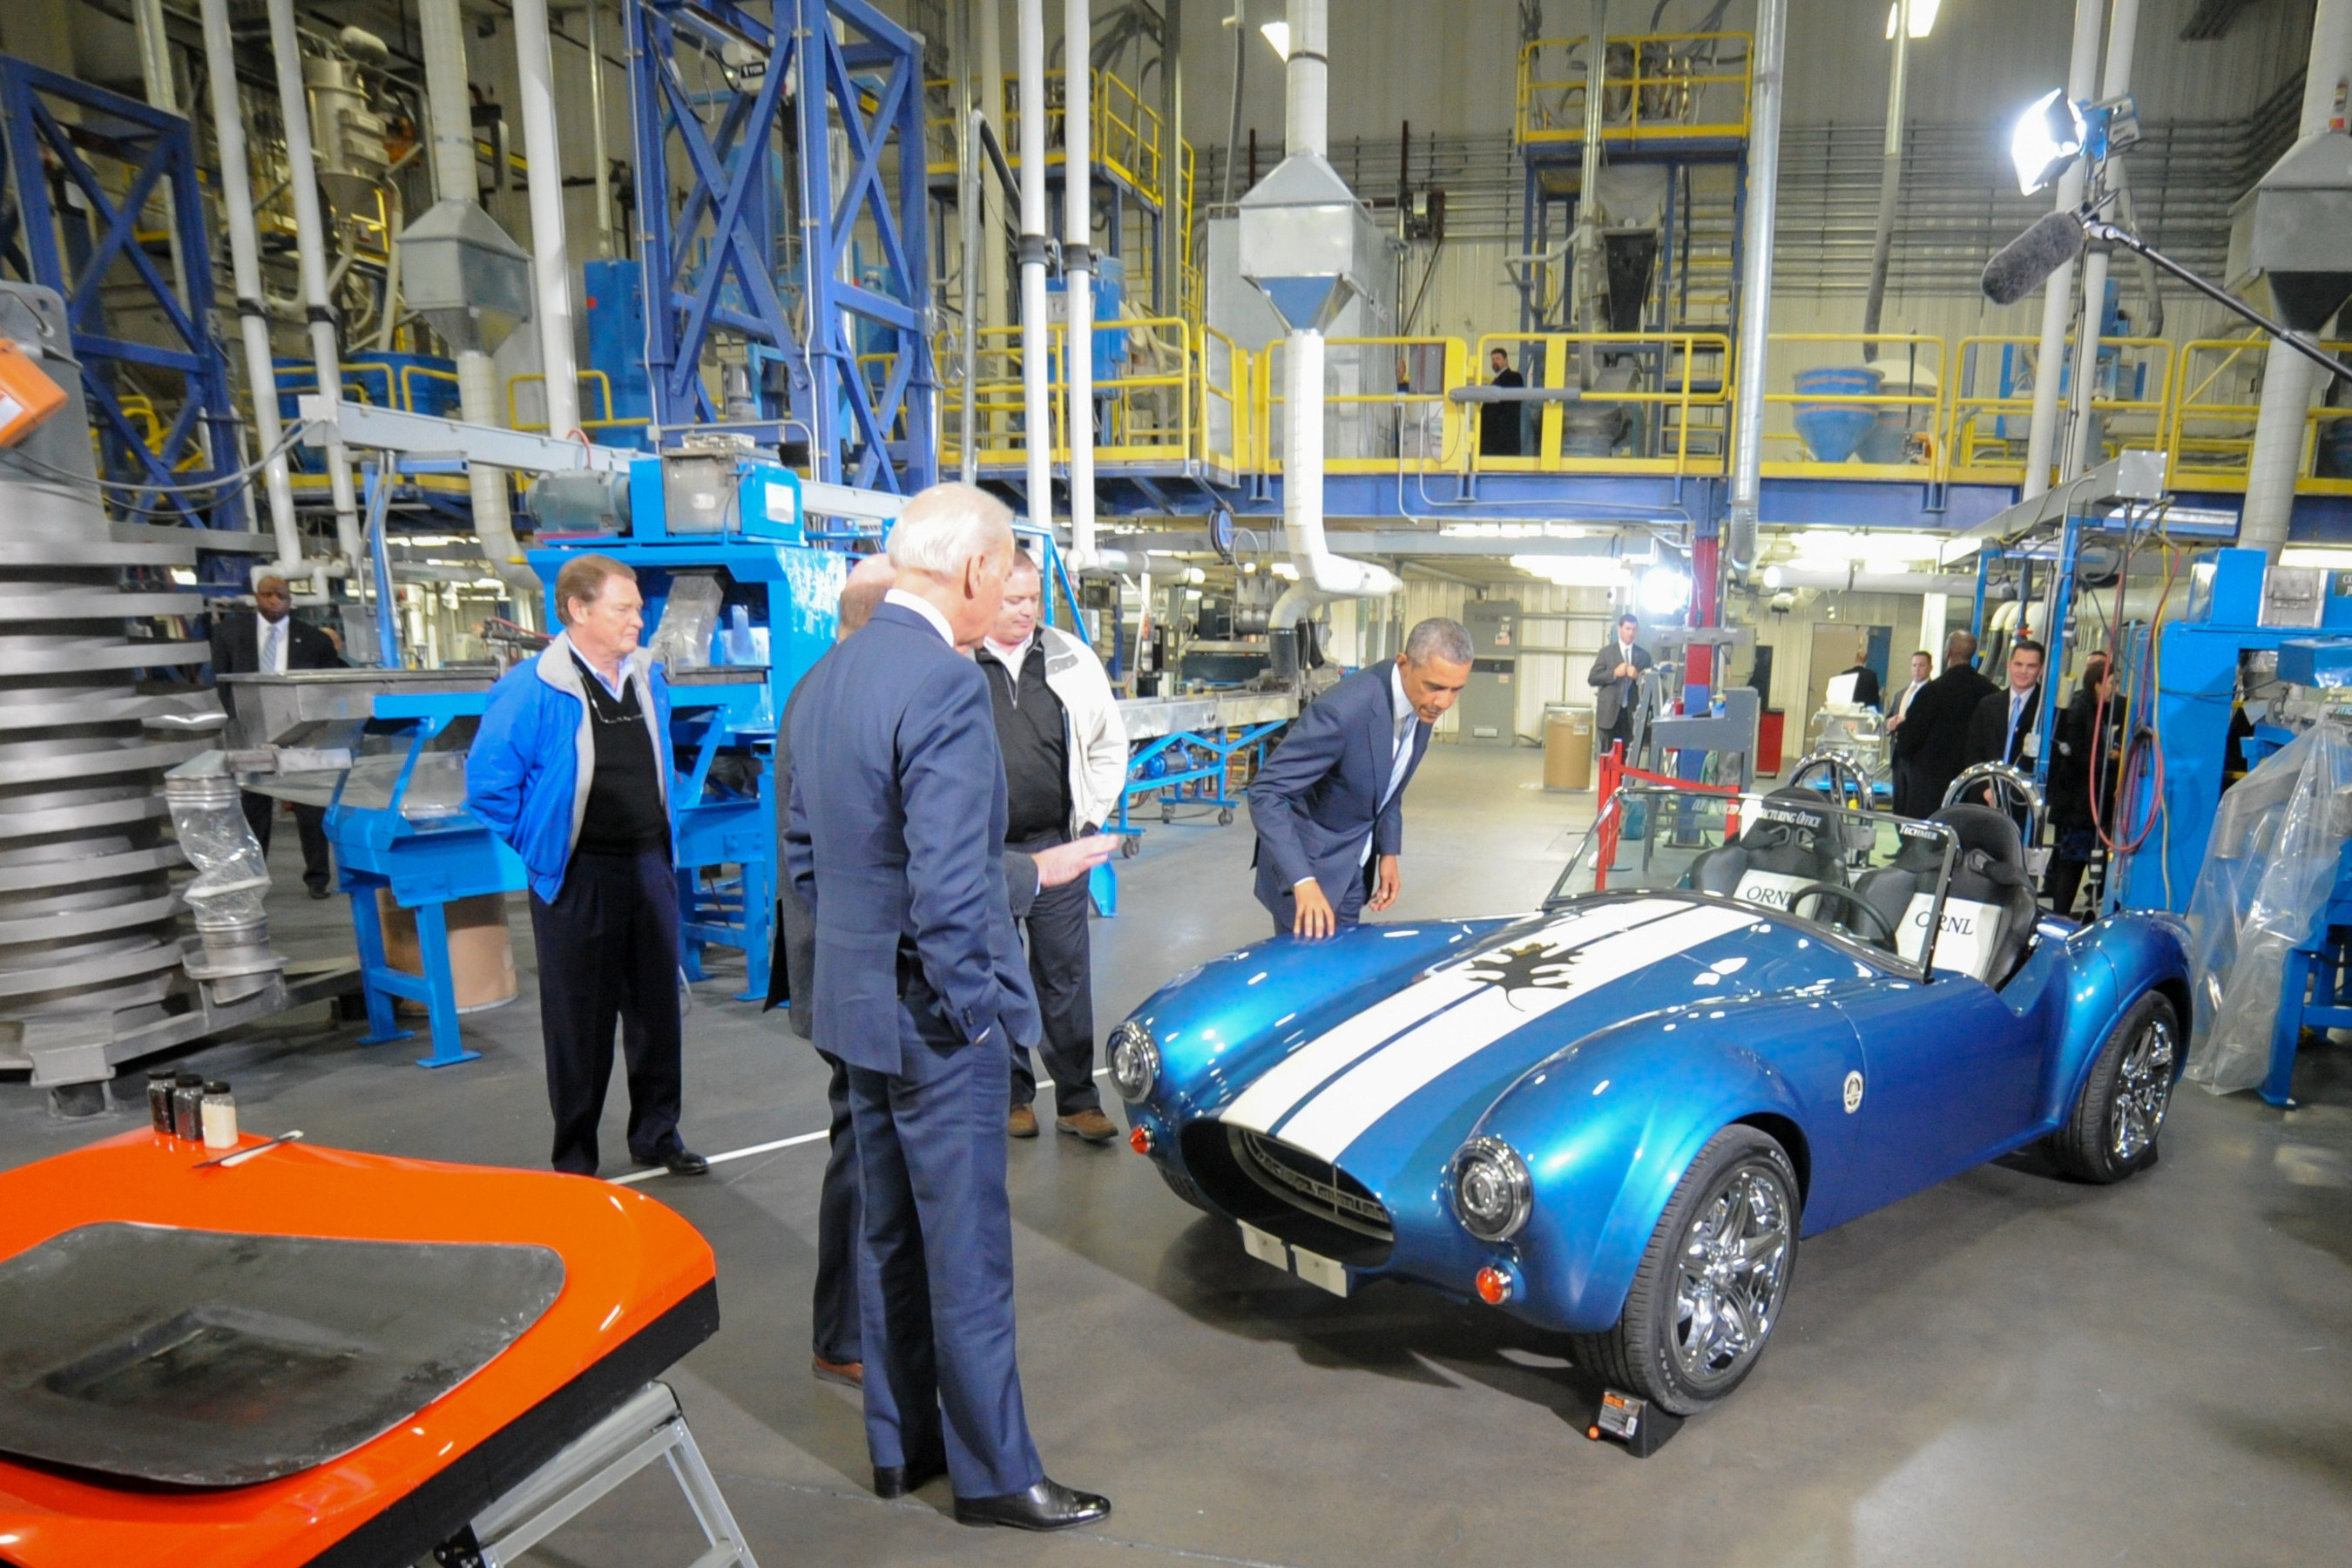 President Obama and Vice President Biden Toured the Techmer PM, LLC Production Facility and Gained a Look at a 3-D Printed Car Created Using Techmer ES Carbon Fiber Materials